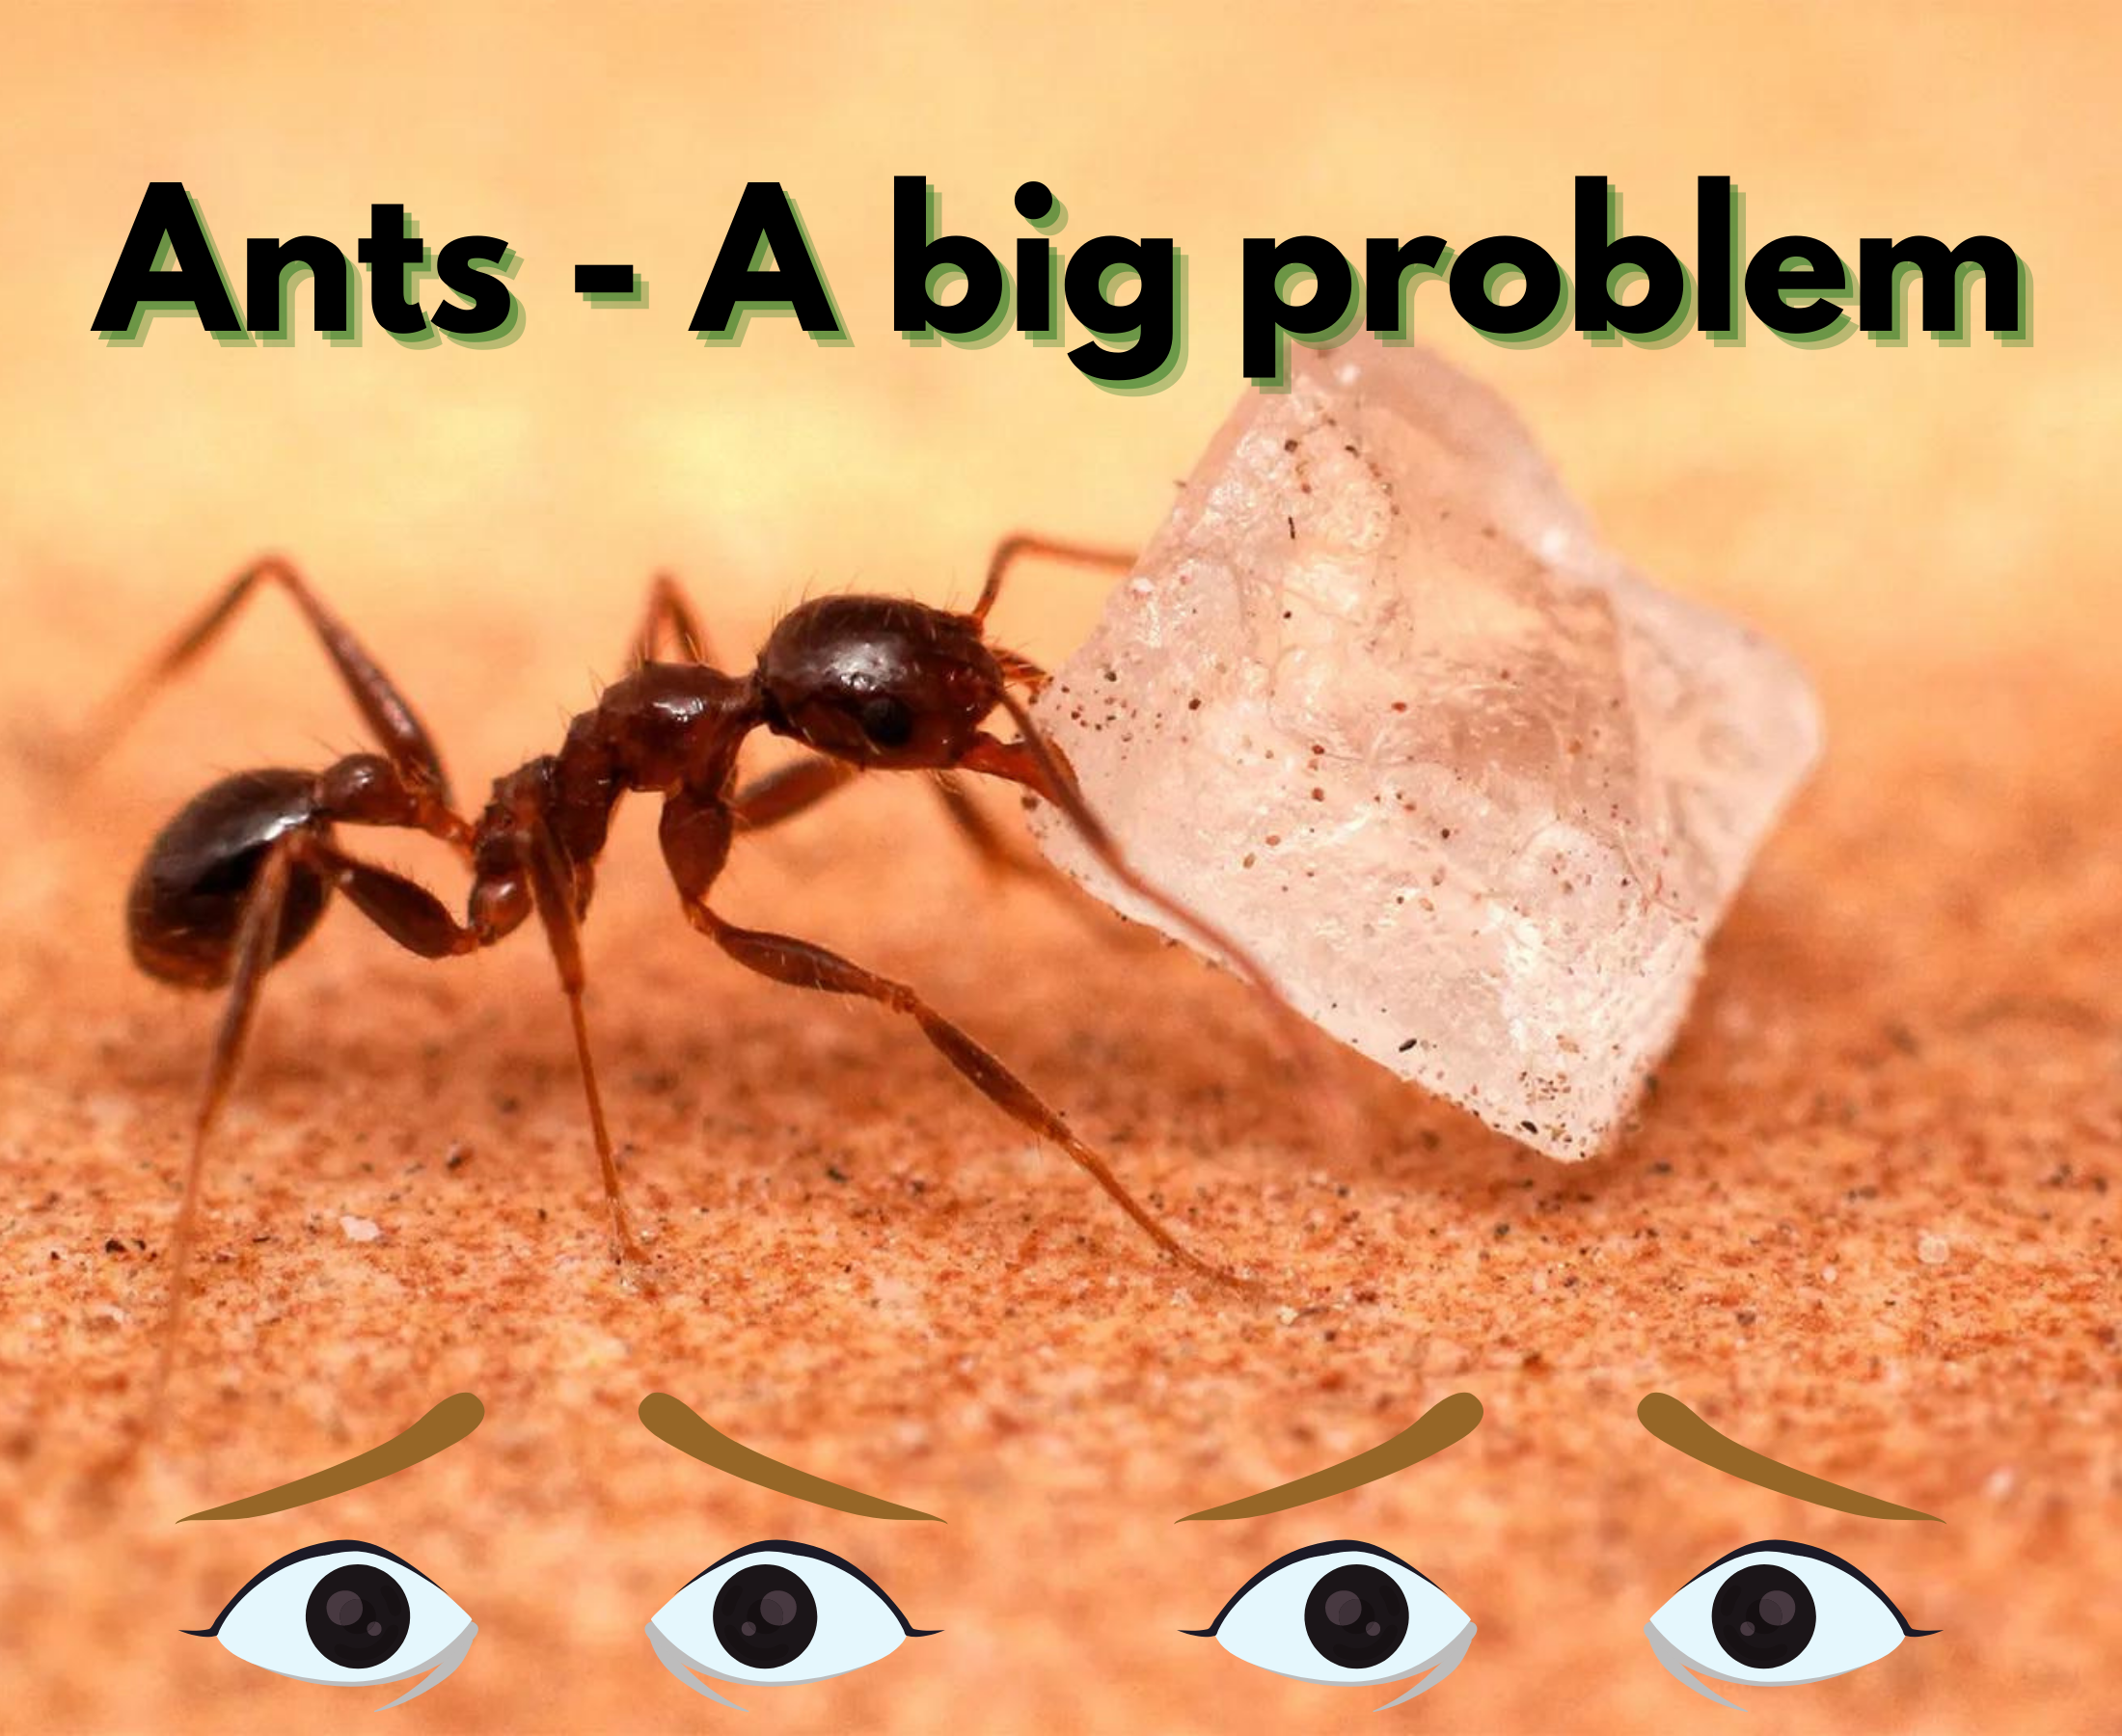 Damage caused by ants their prevention and control measure